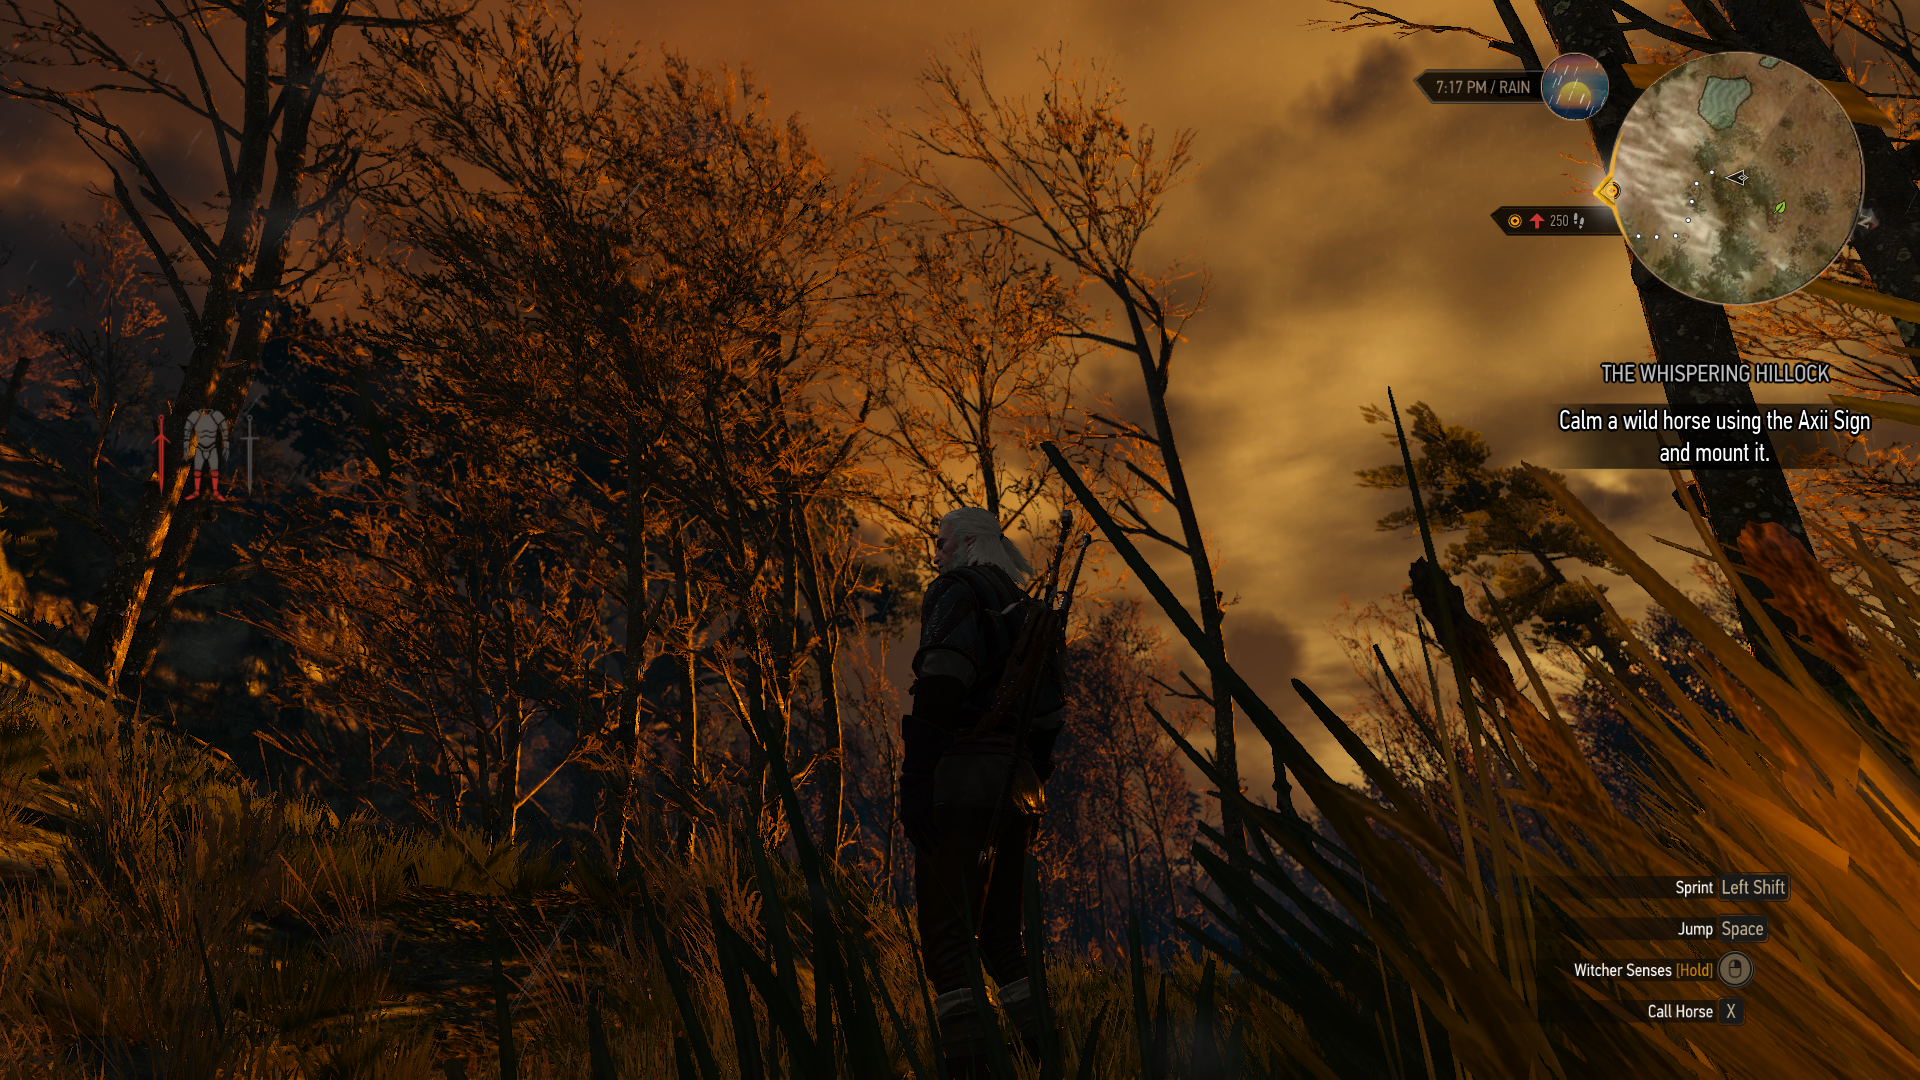 witcher3_2015_05_25_25epjm.png